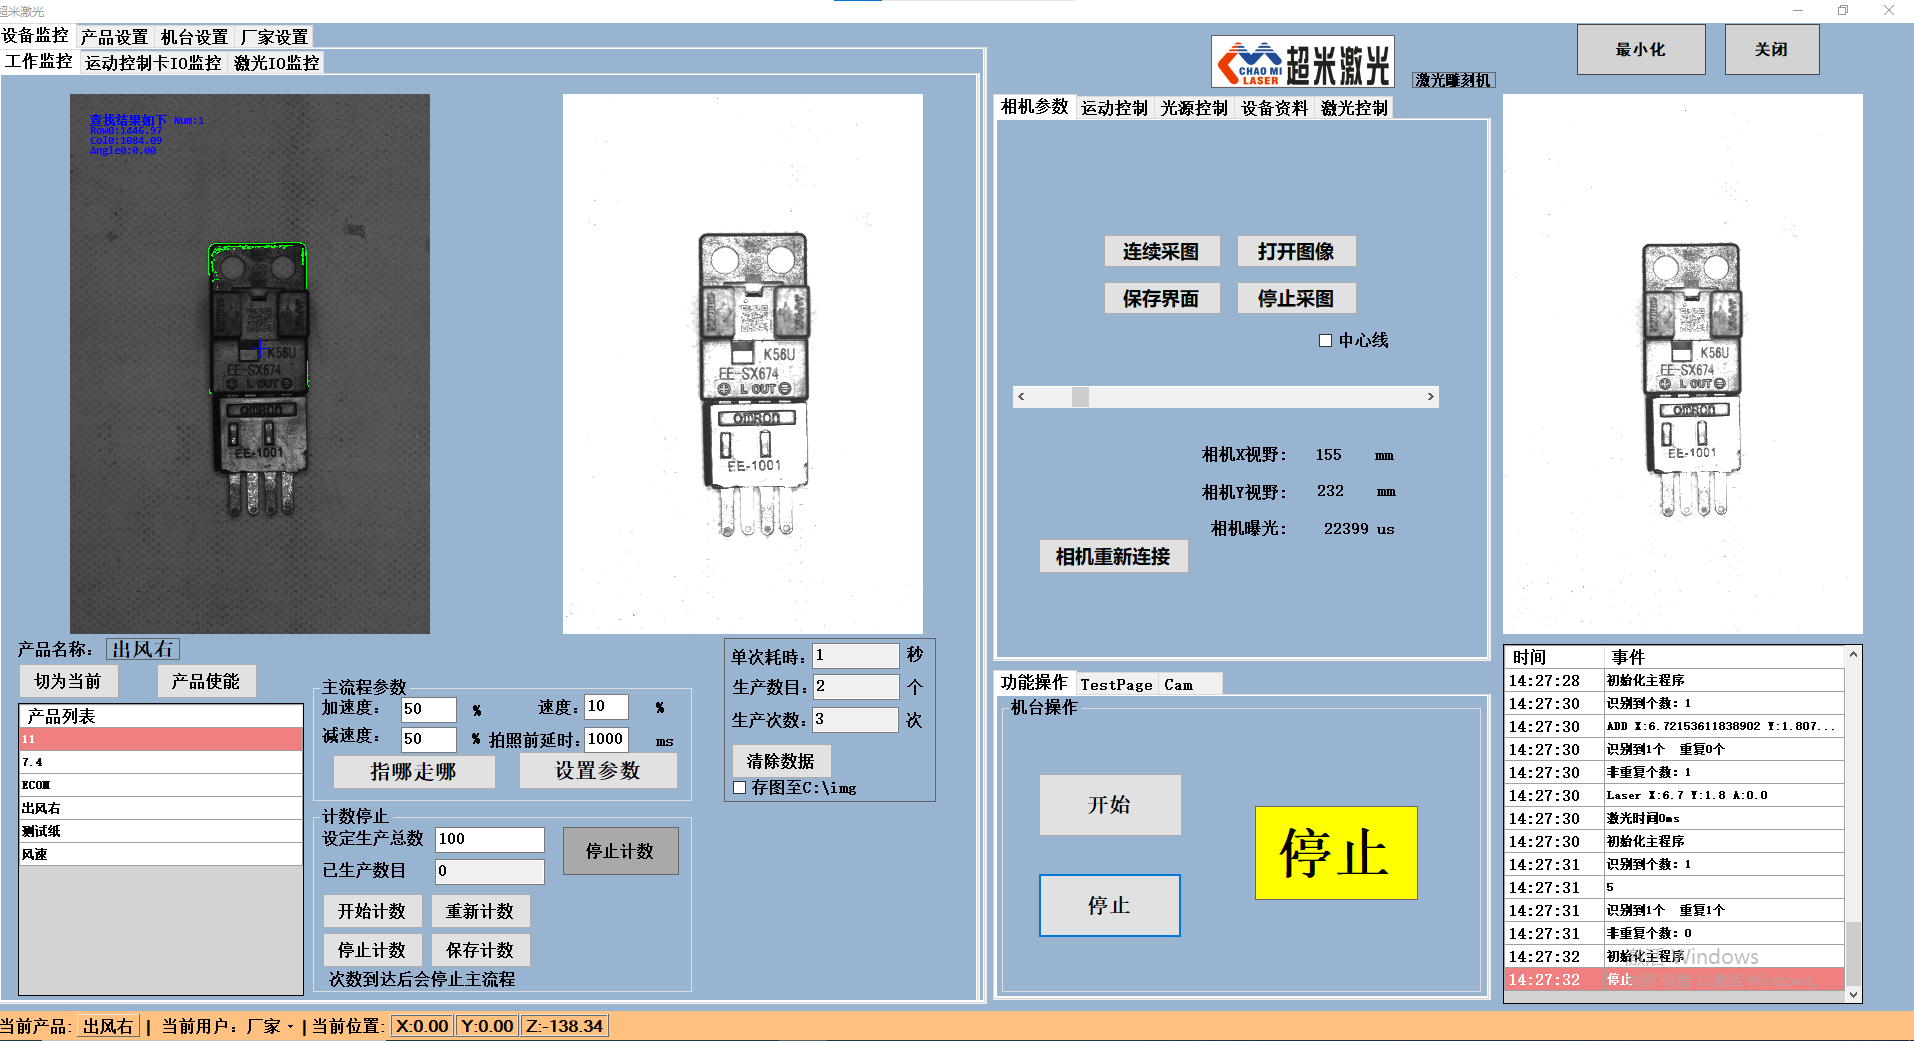 Installation of vision software for UV marking machine